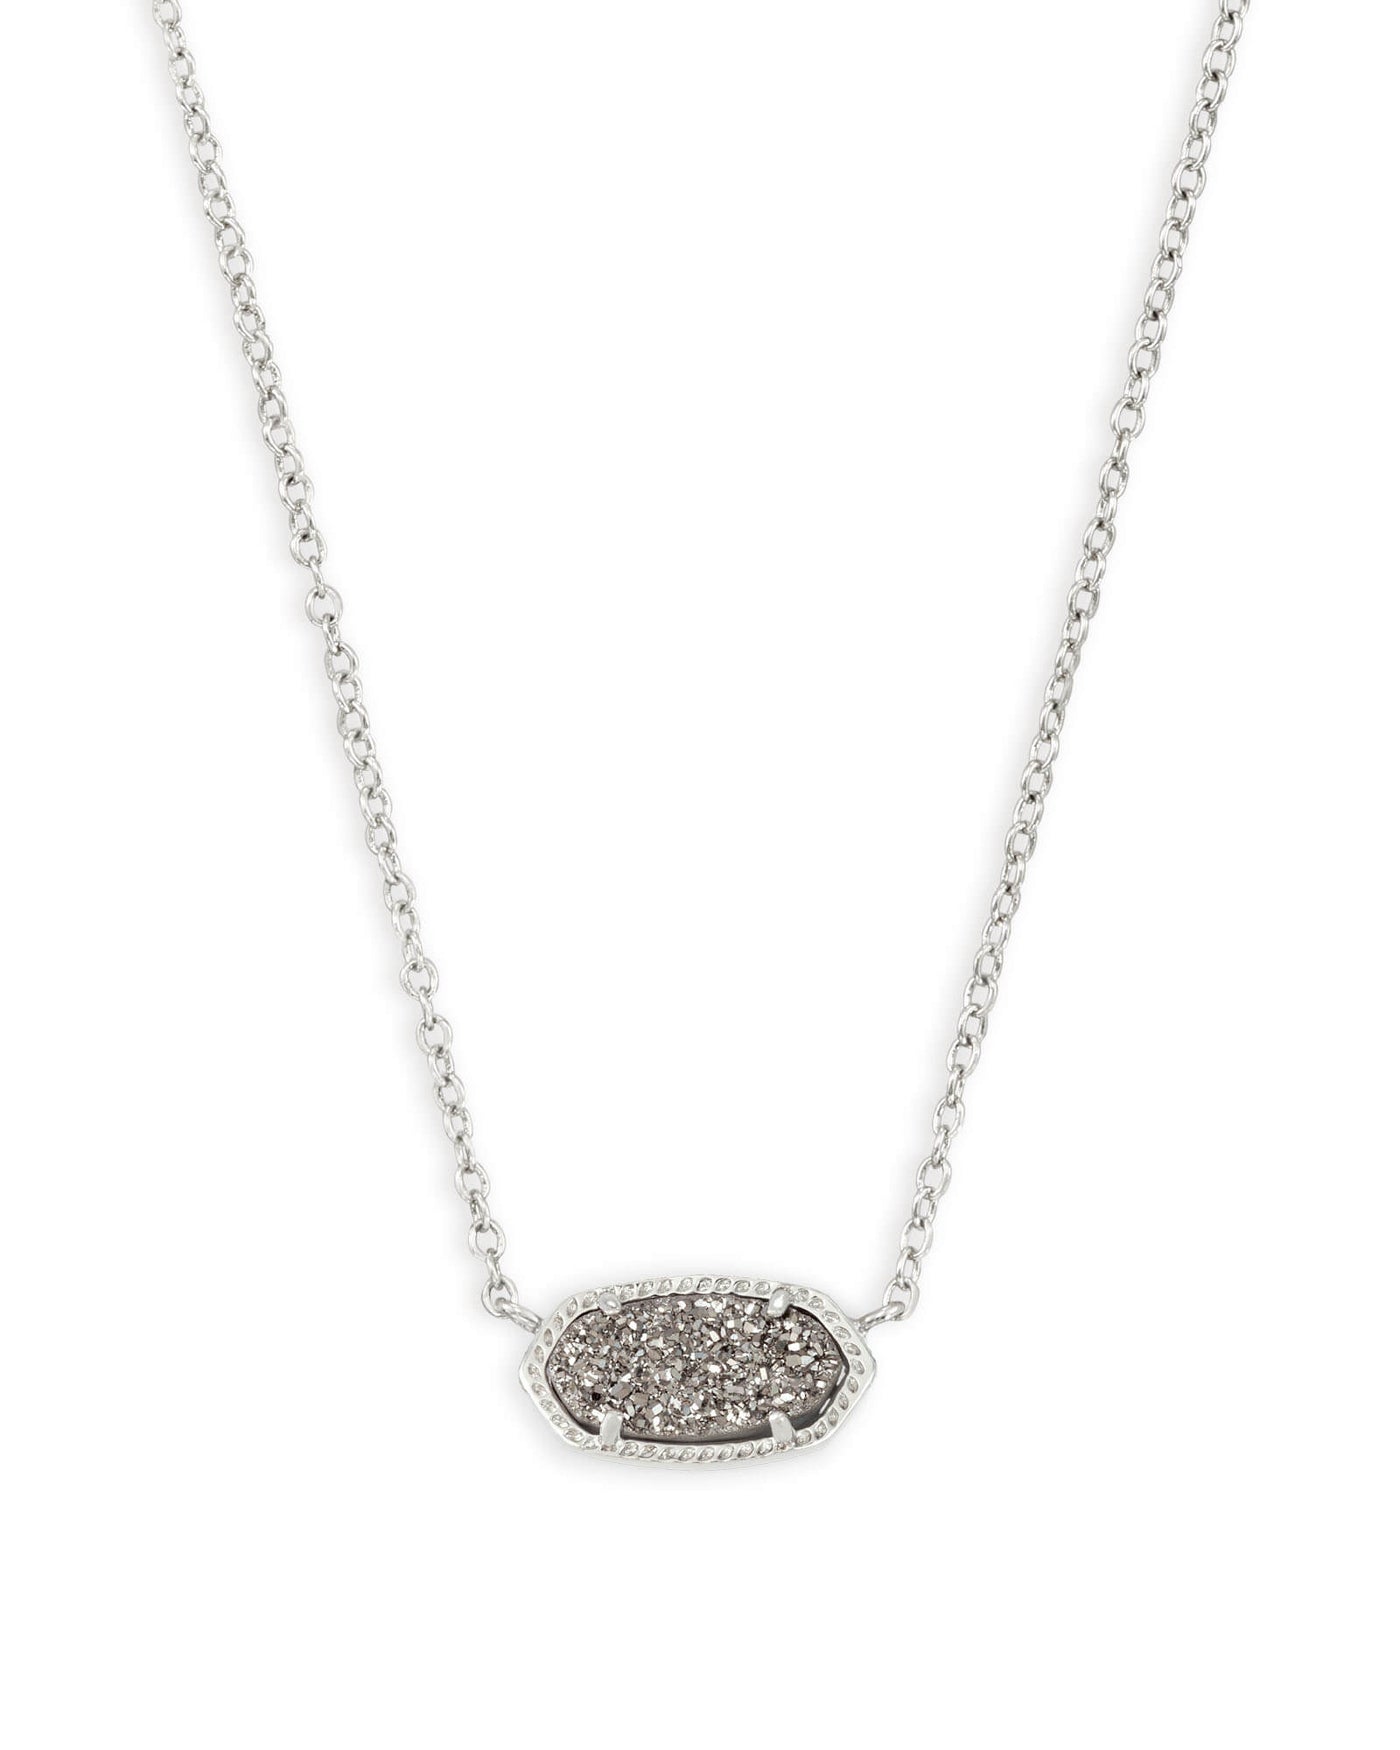 Kendra Scott Elisa Silver Pendant Necklace in Platinum Drusy-Necklaces-Kendra Scott-Market Street Nest, Fashionable Clothing, Shoes and Home Décor Located in Mabank, TX